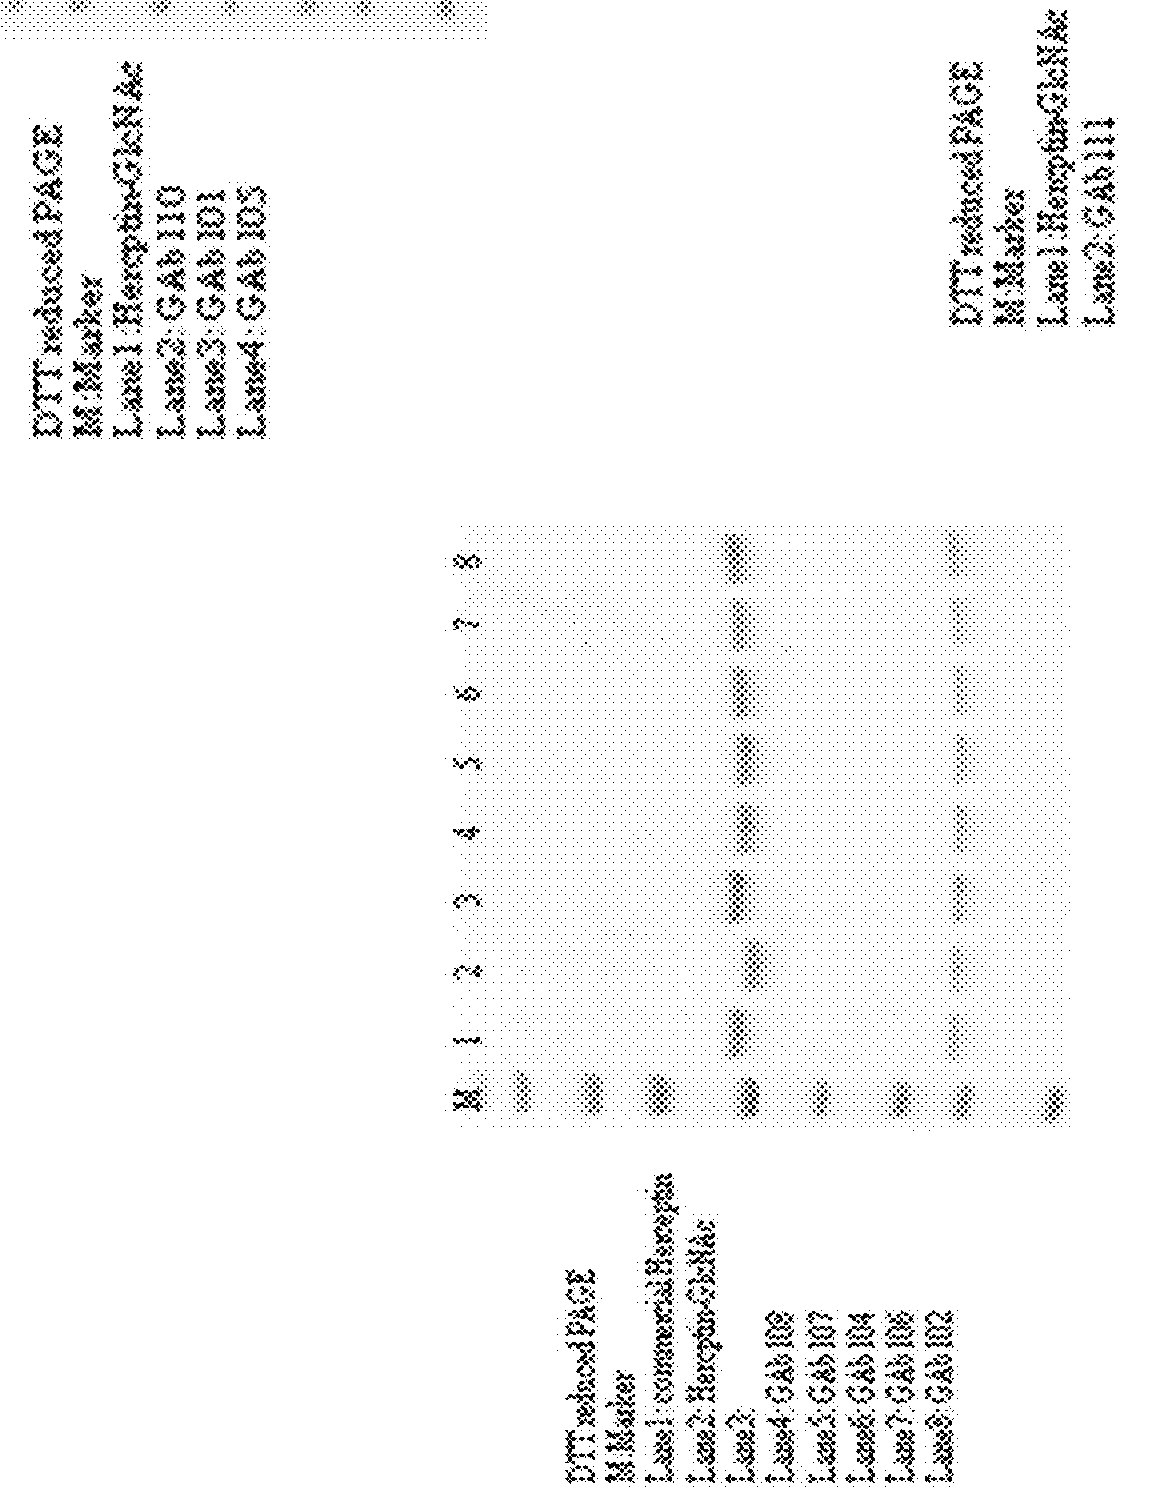 Anti-HER2 glycoantibodies and uses thereof